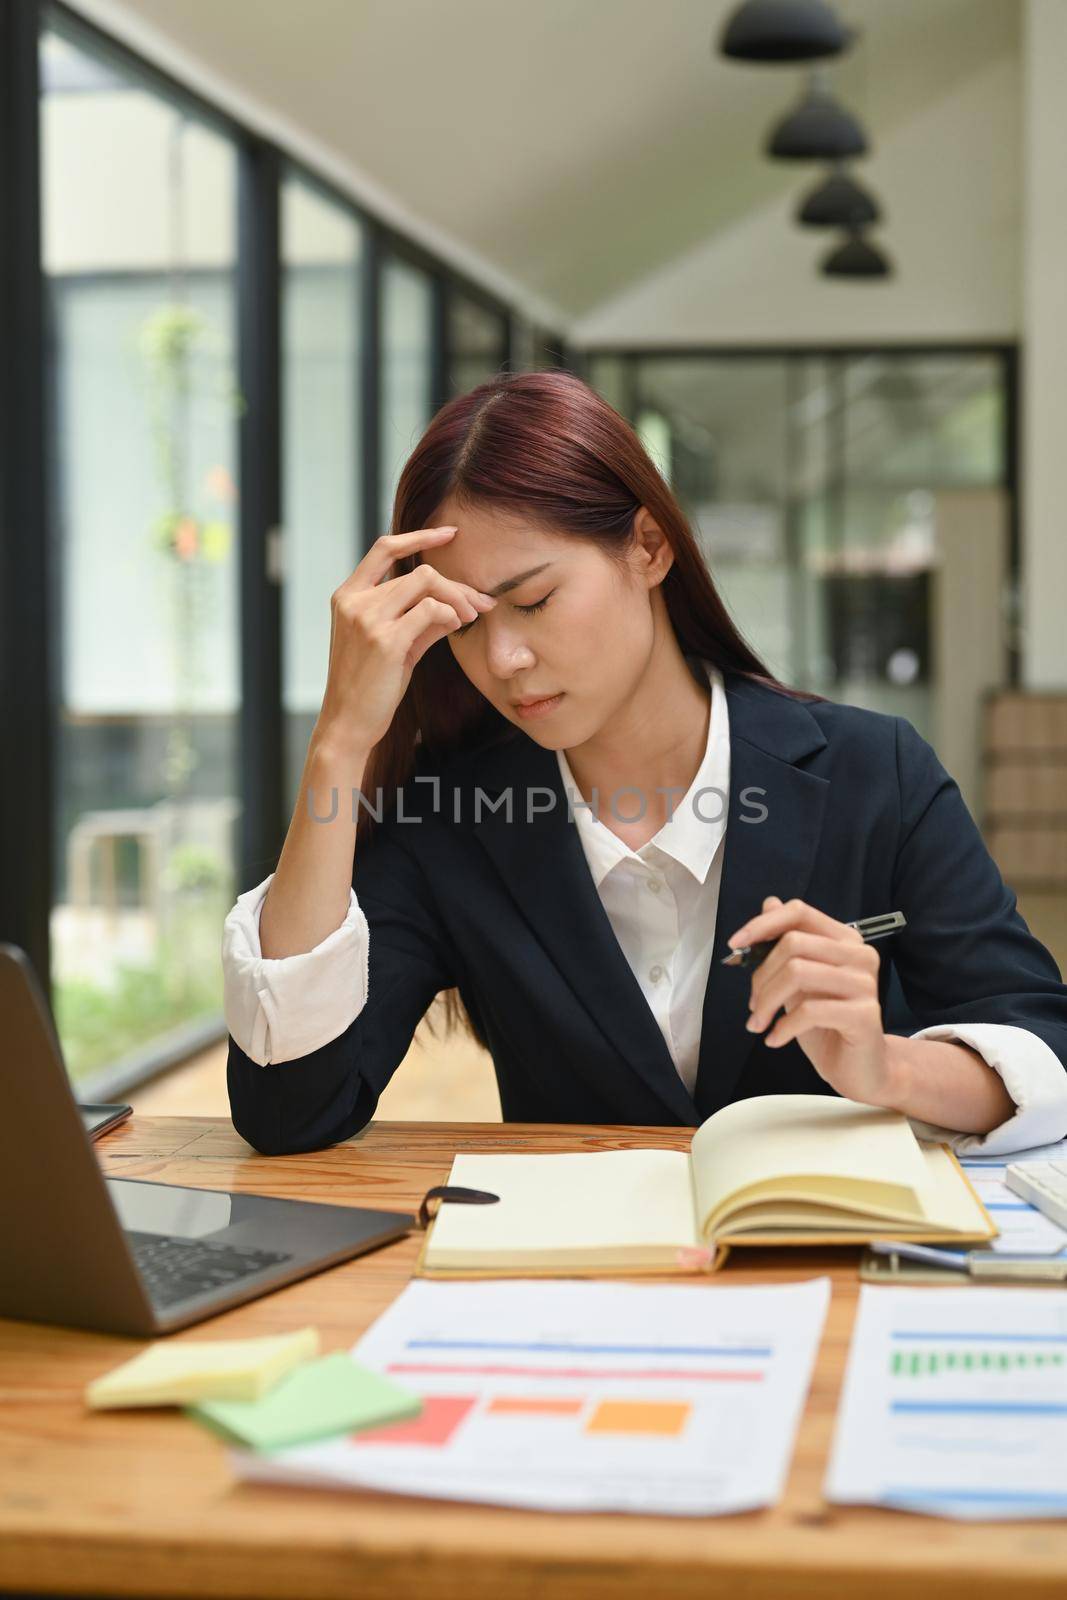 Frustrated young businesswoman stress from work or upset after finishing meeting. Emotional pressure, stress at work concept by prathanchorruangsak